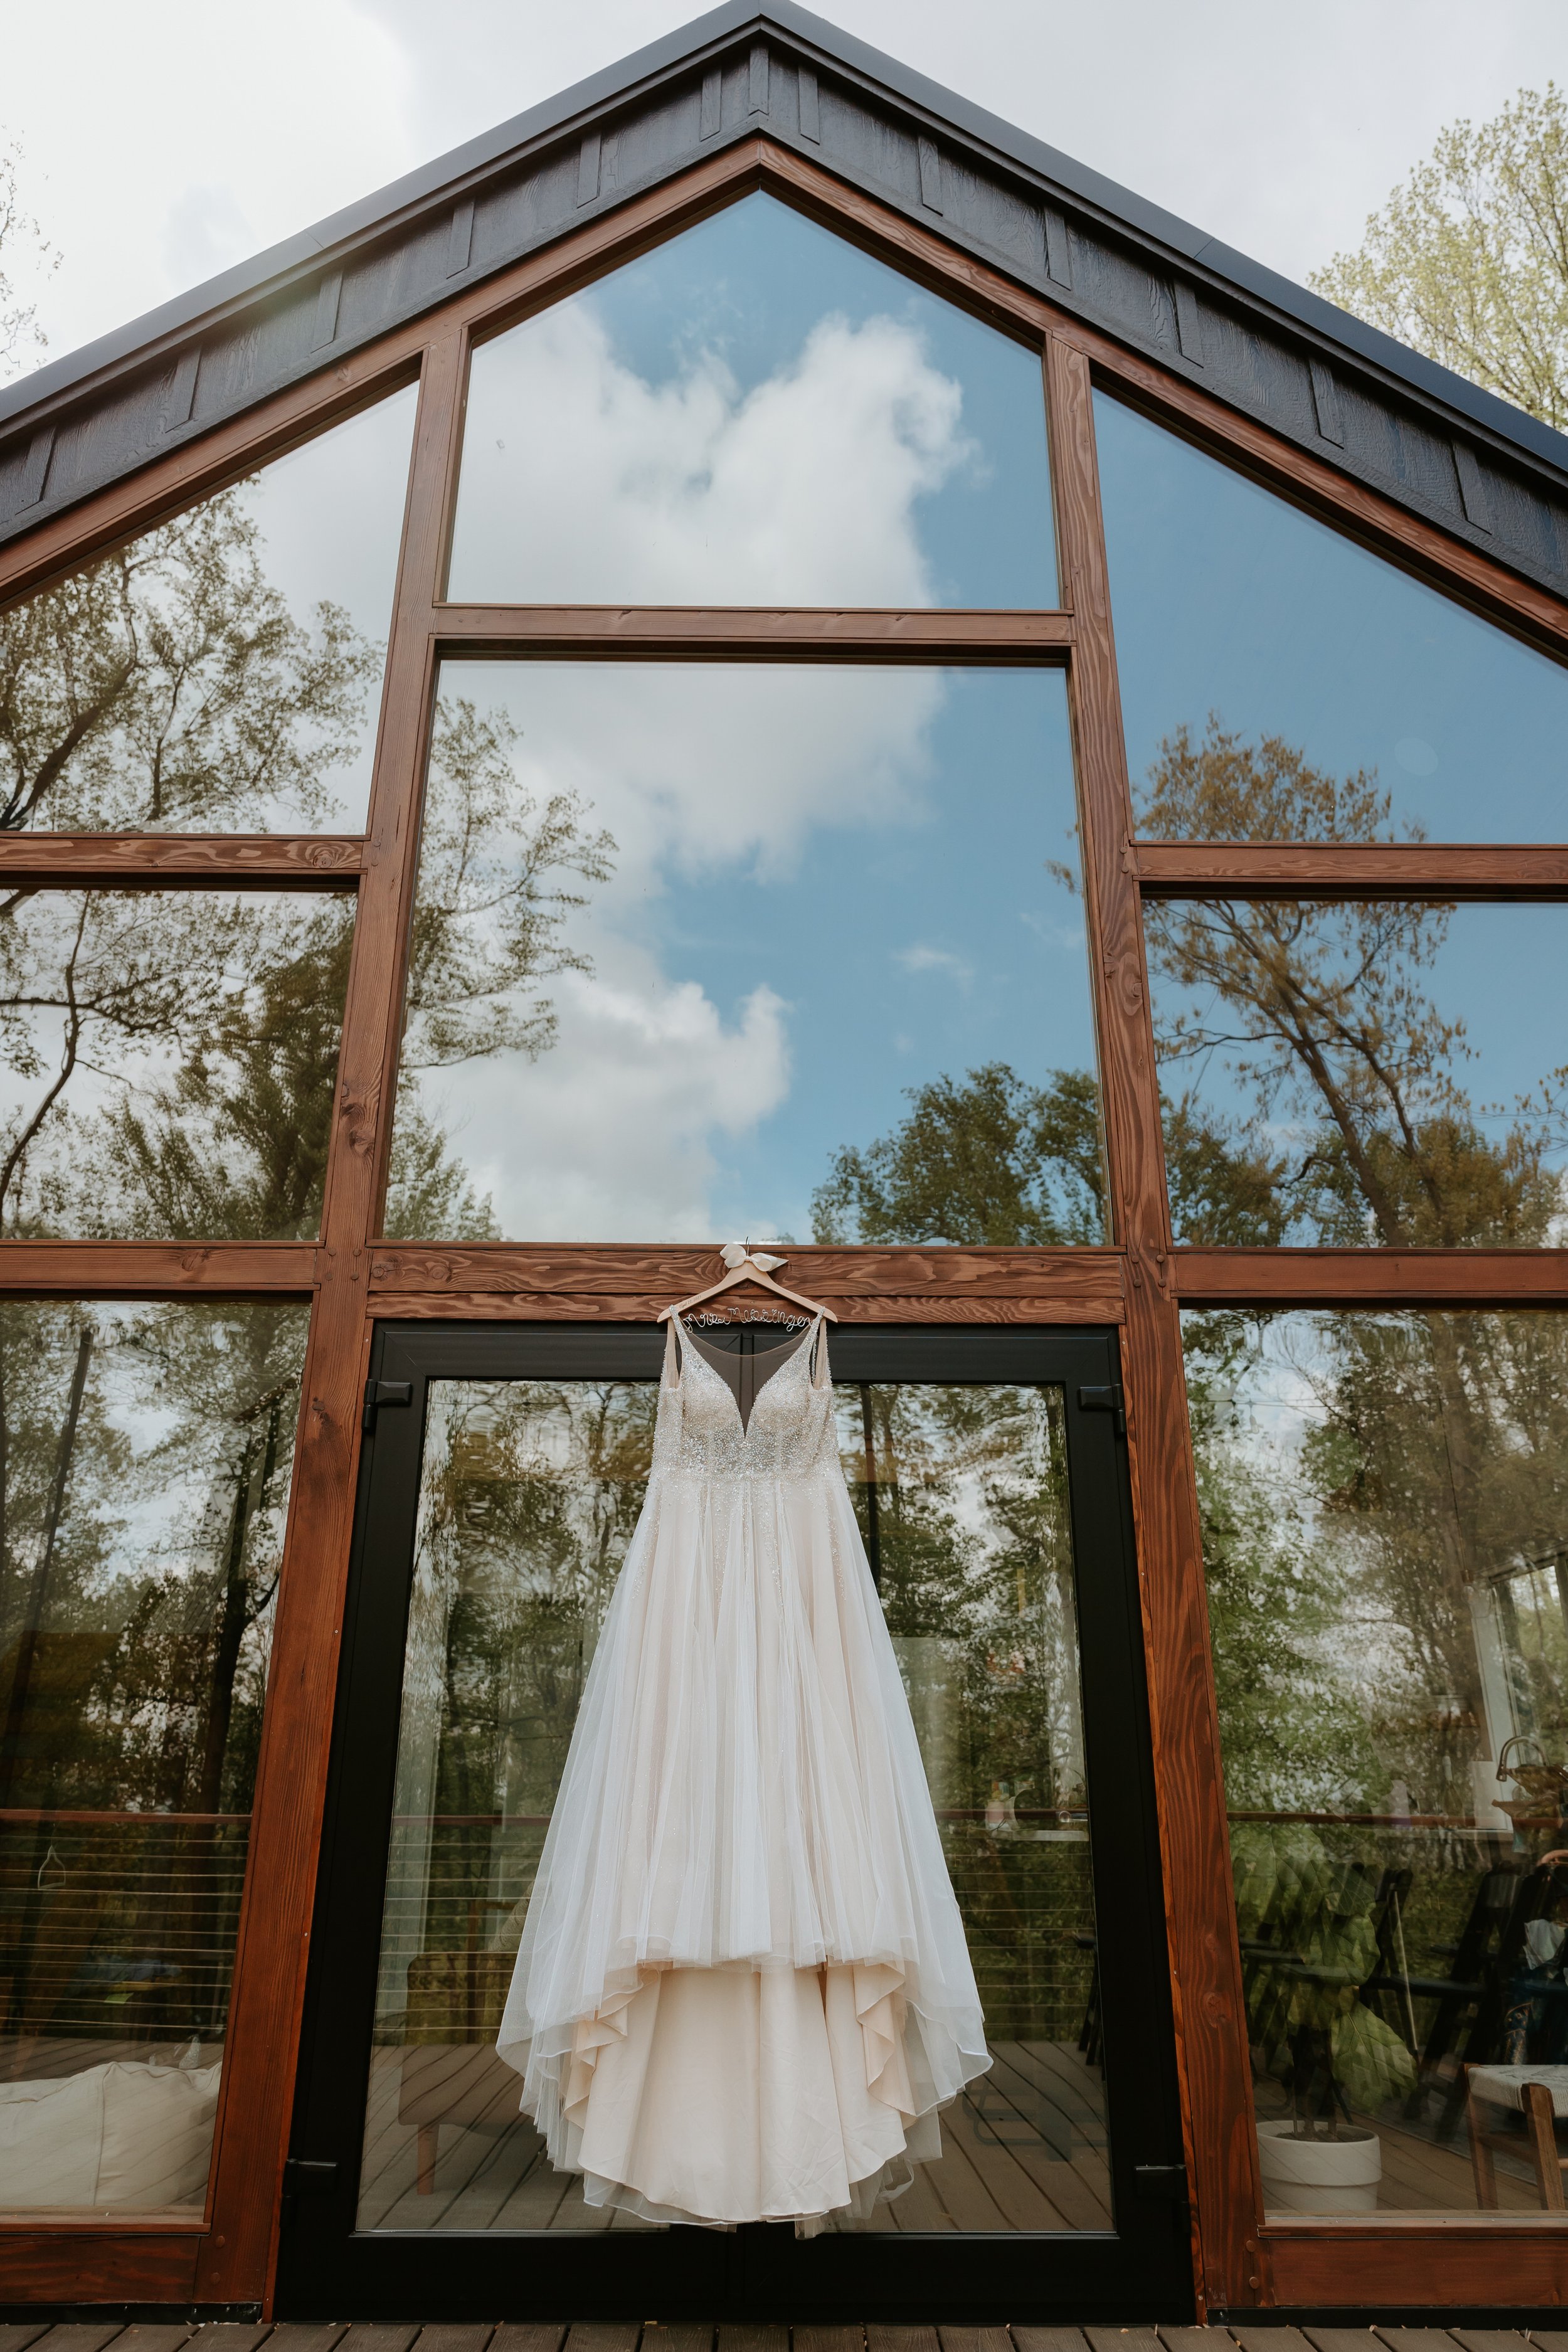 Wedding dress hangs in front of large two story window.